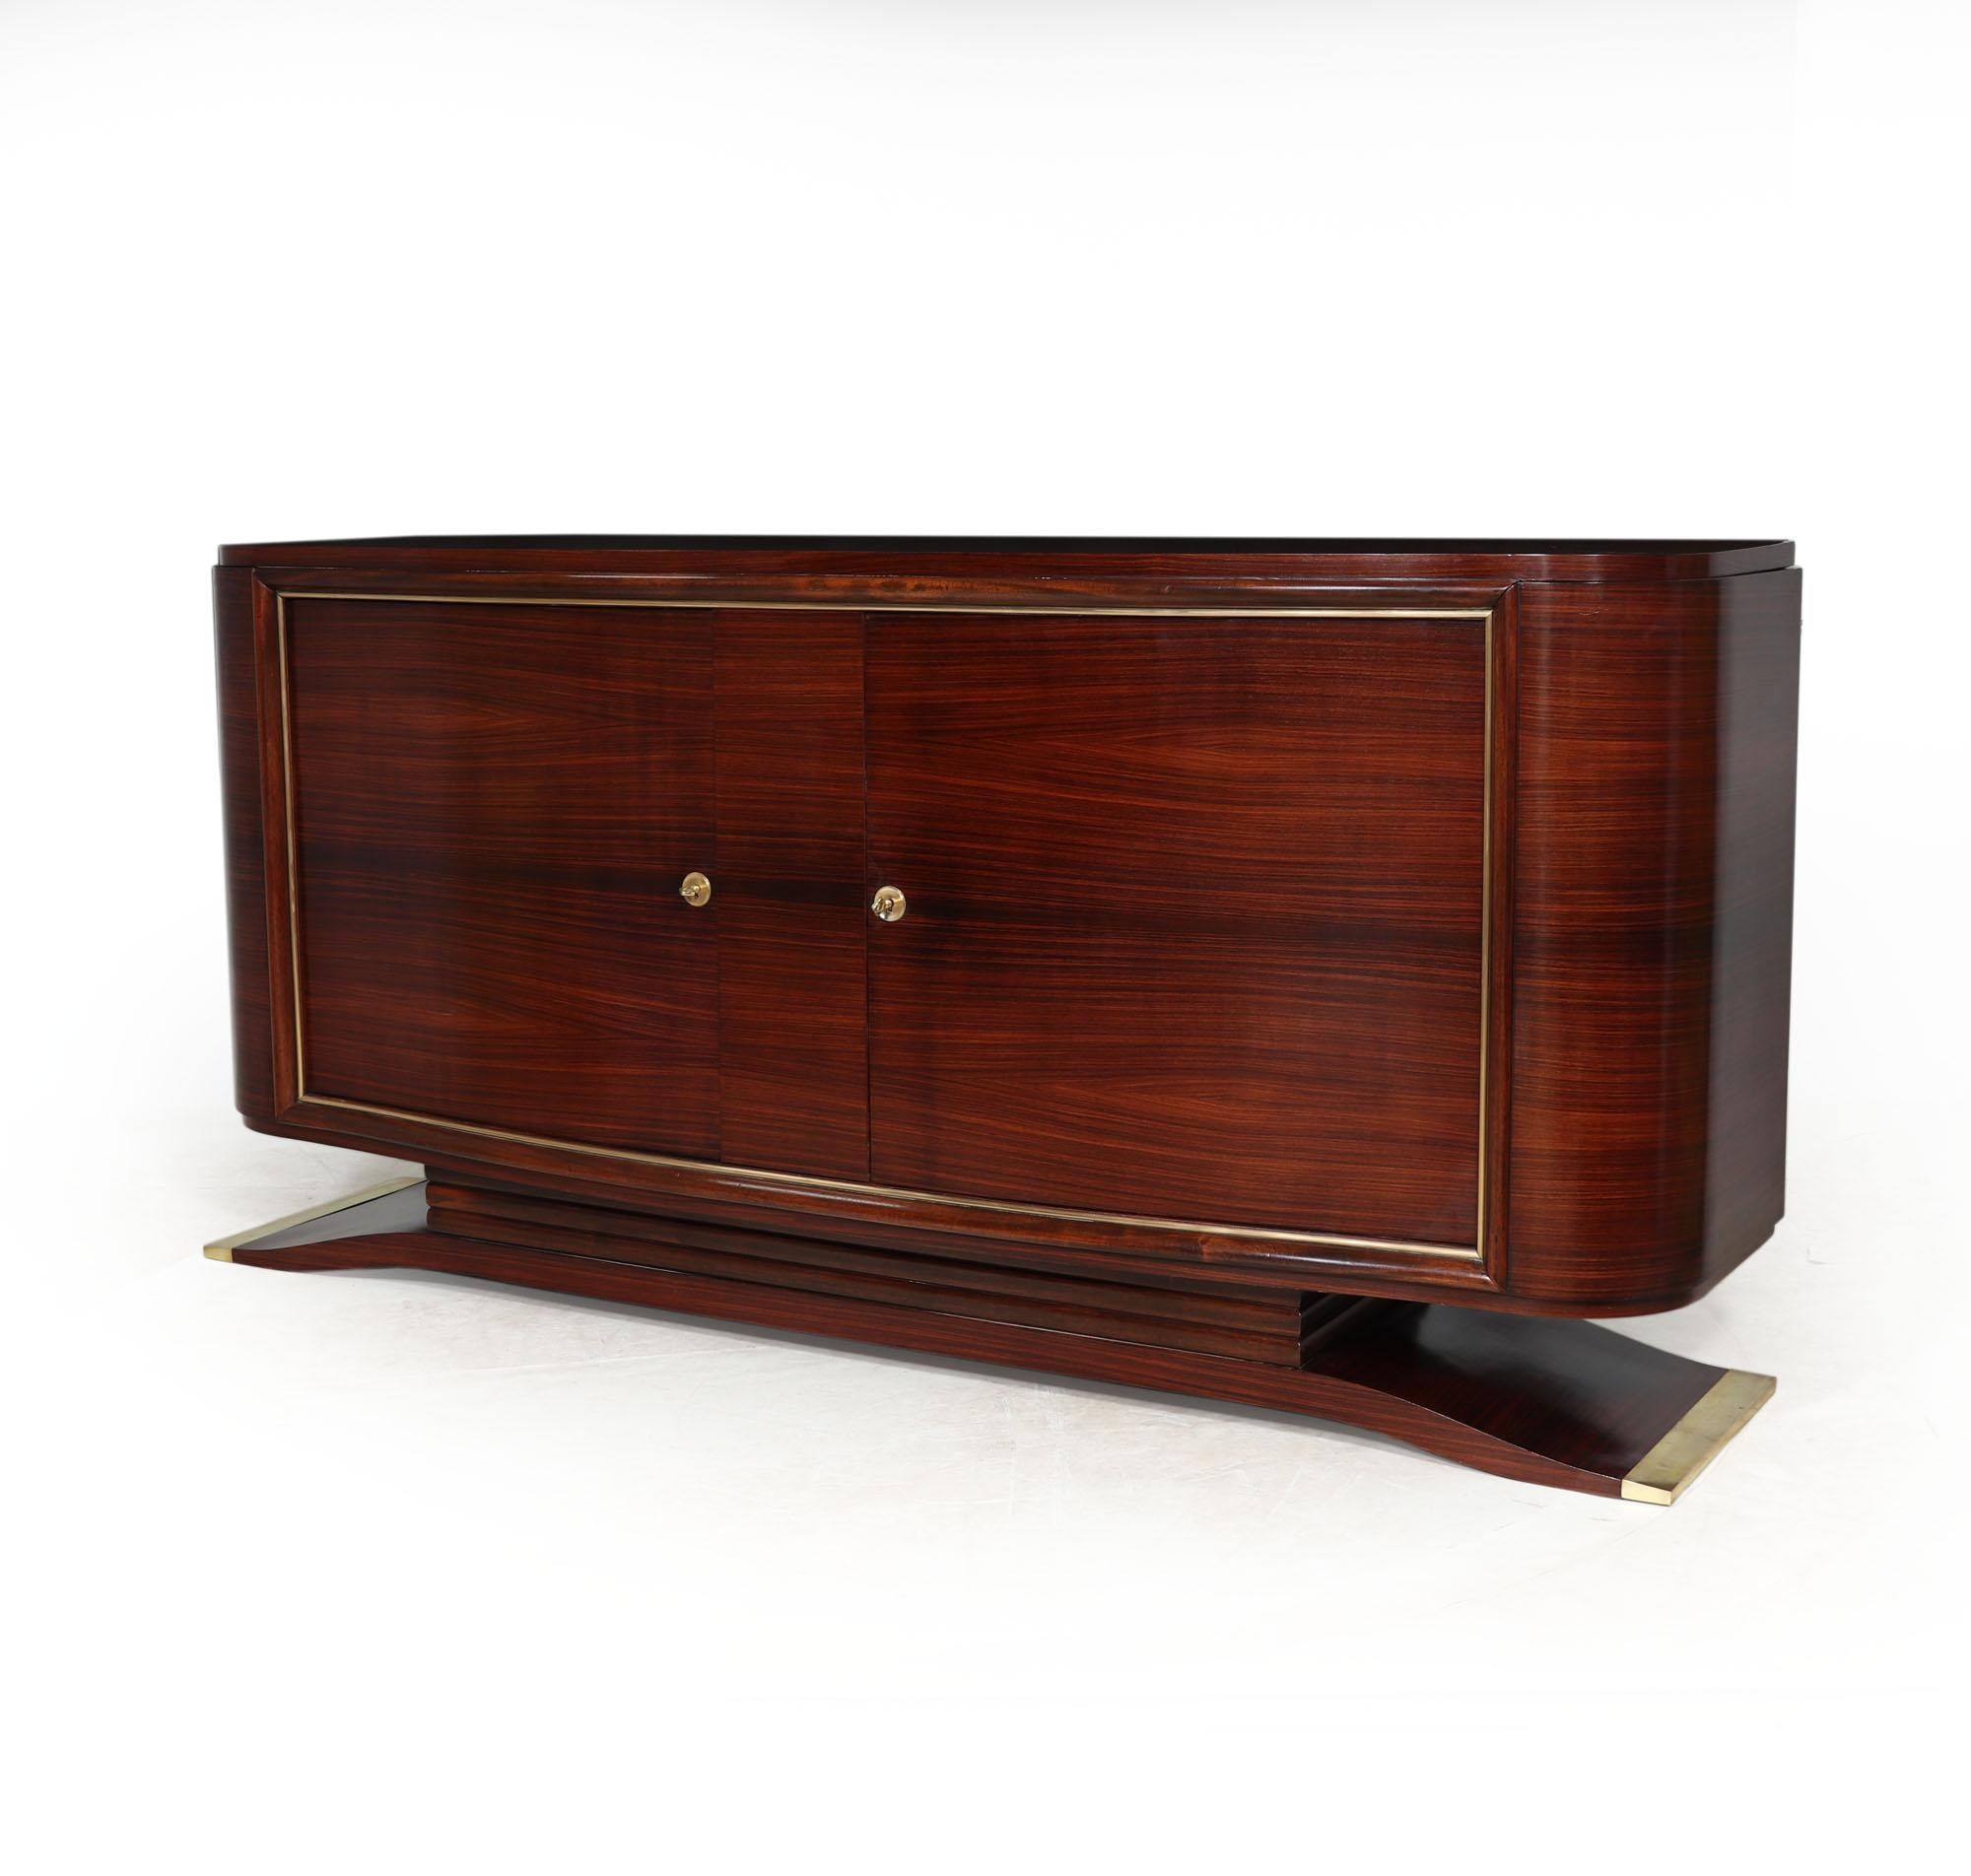 FRENCH ART DECO SIDEBOARD BY MARCEL CERF
This stunning French Art Deco Sideboard in Rosewood is an exquisite piece of furniture that leaves a lasting impression. Handcrafted from rosewood, it showcases two elegantly serpentine shaped doors adorned